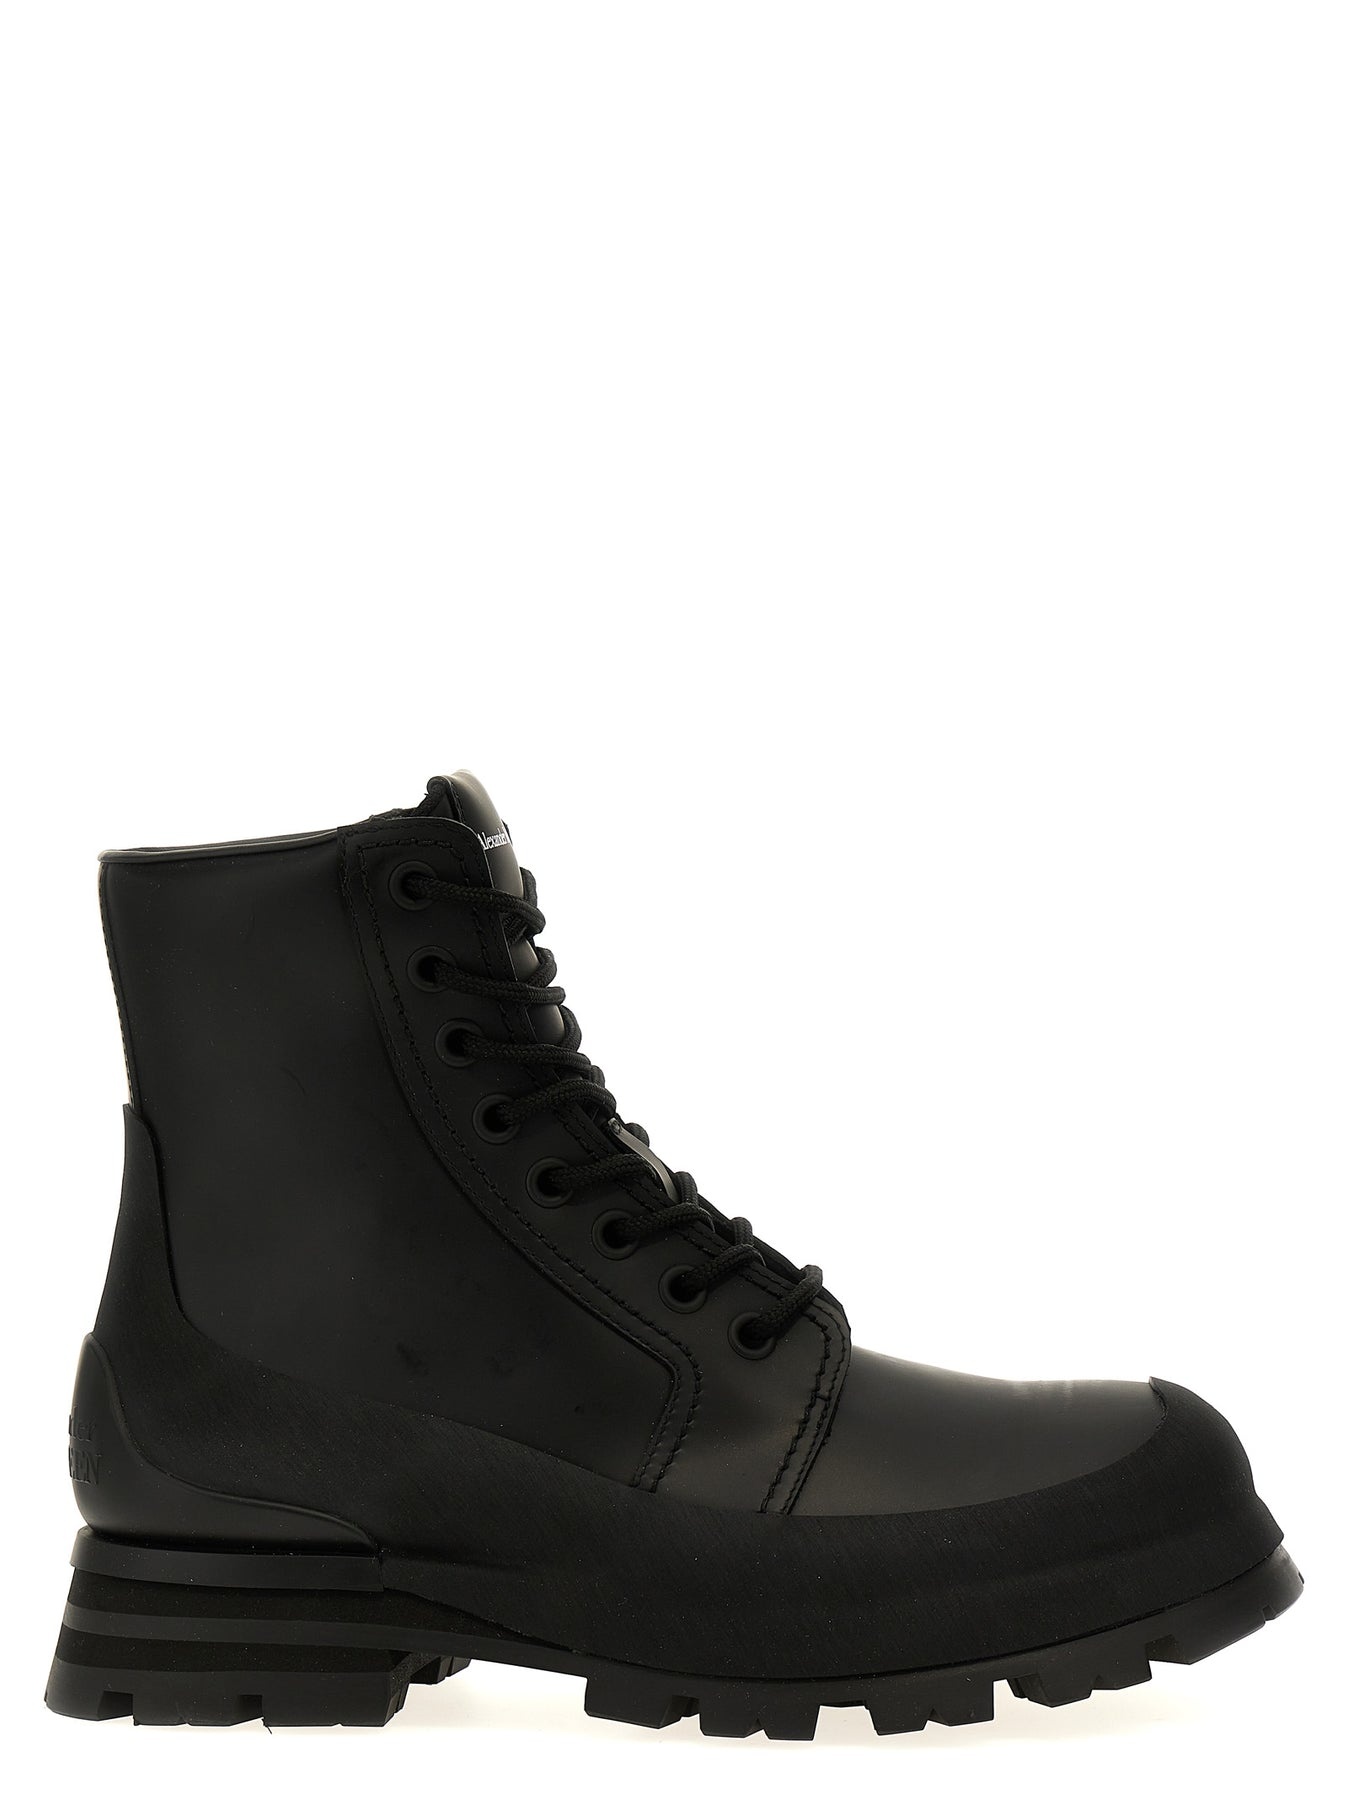 Wander Boots, Ankle Boots Black - 1